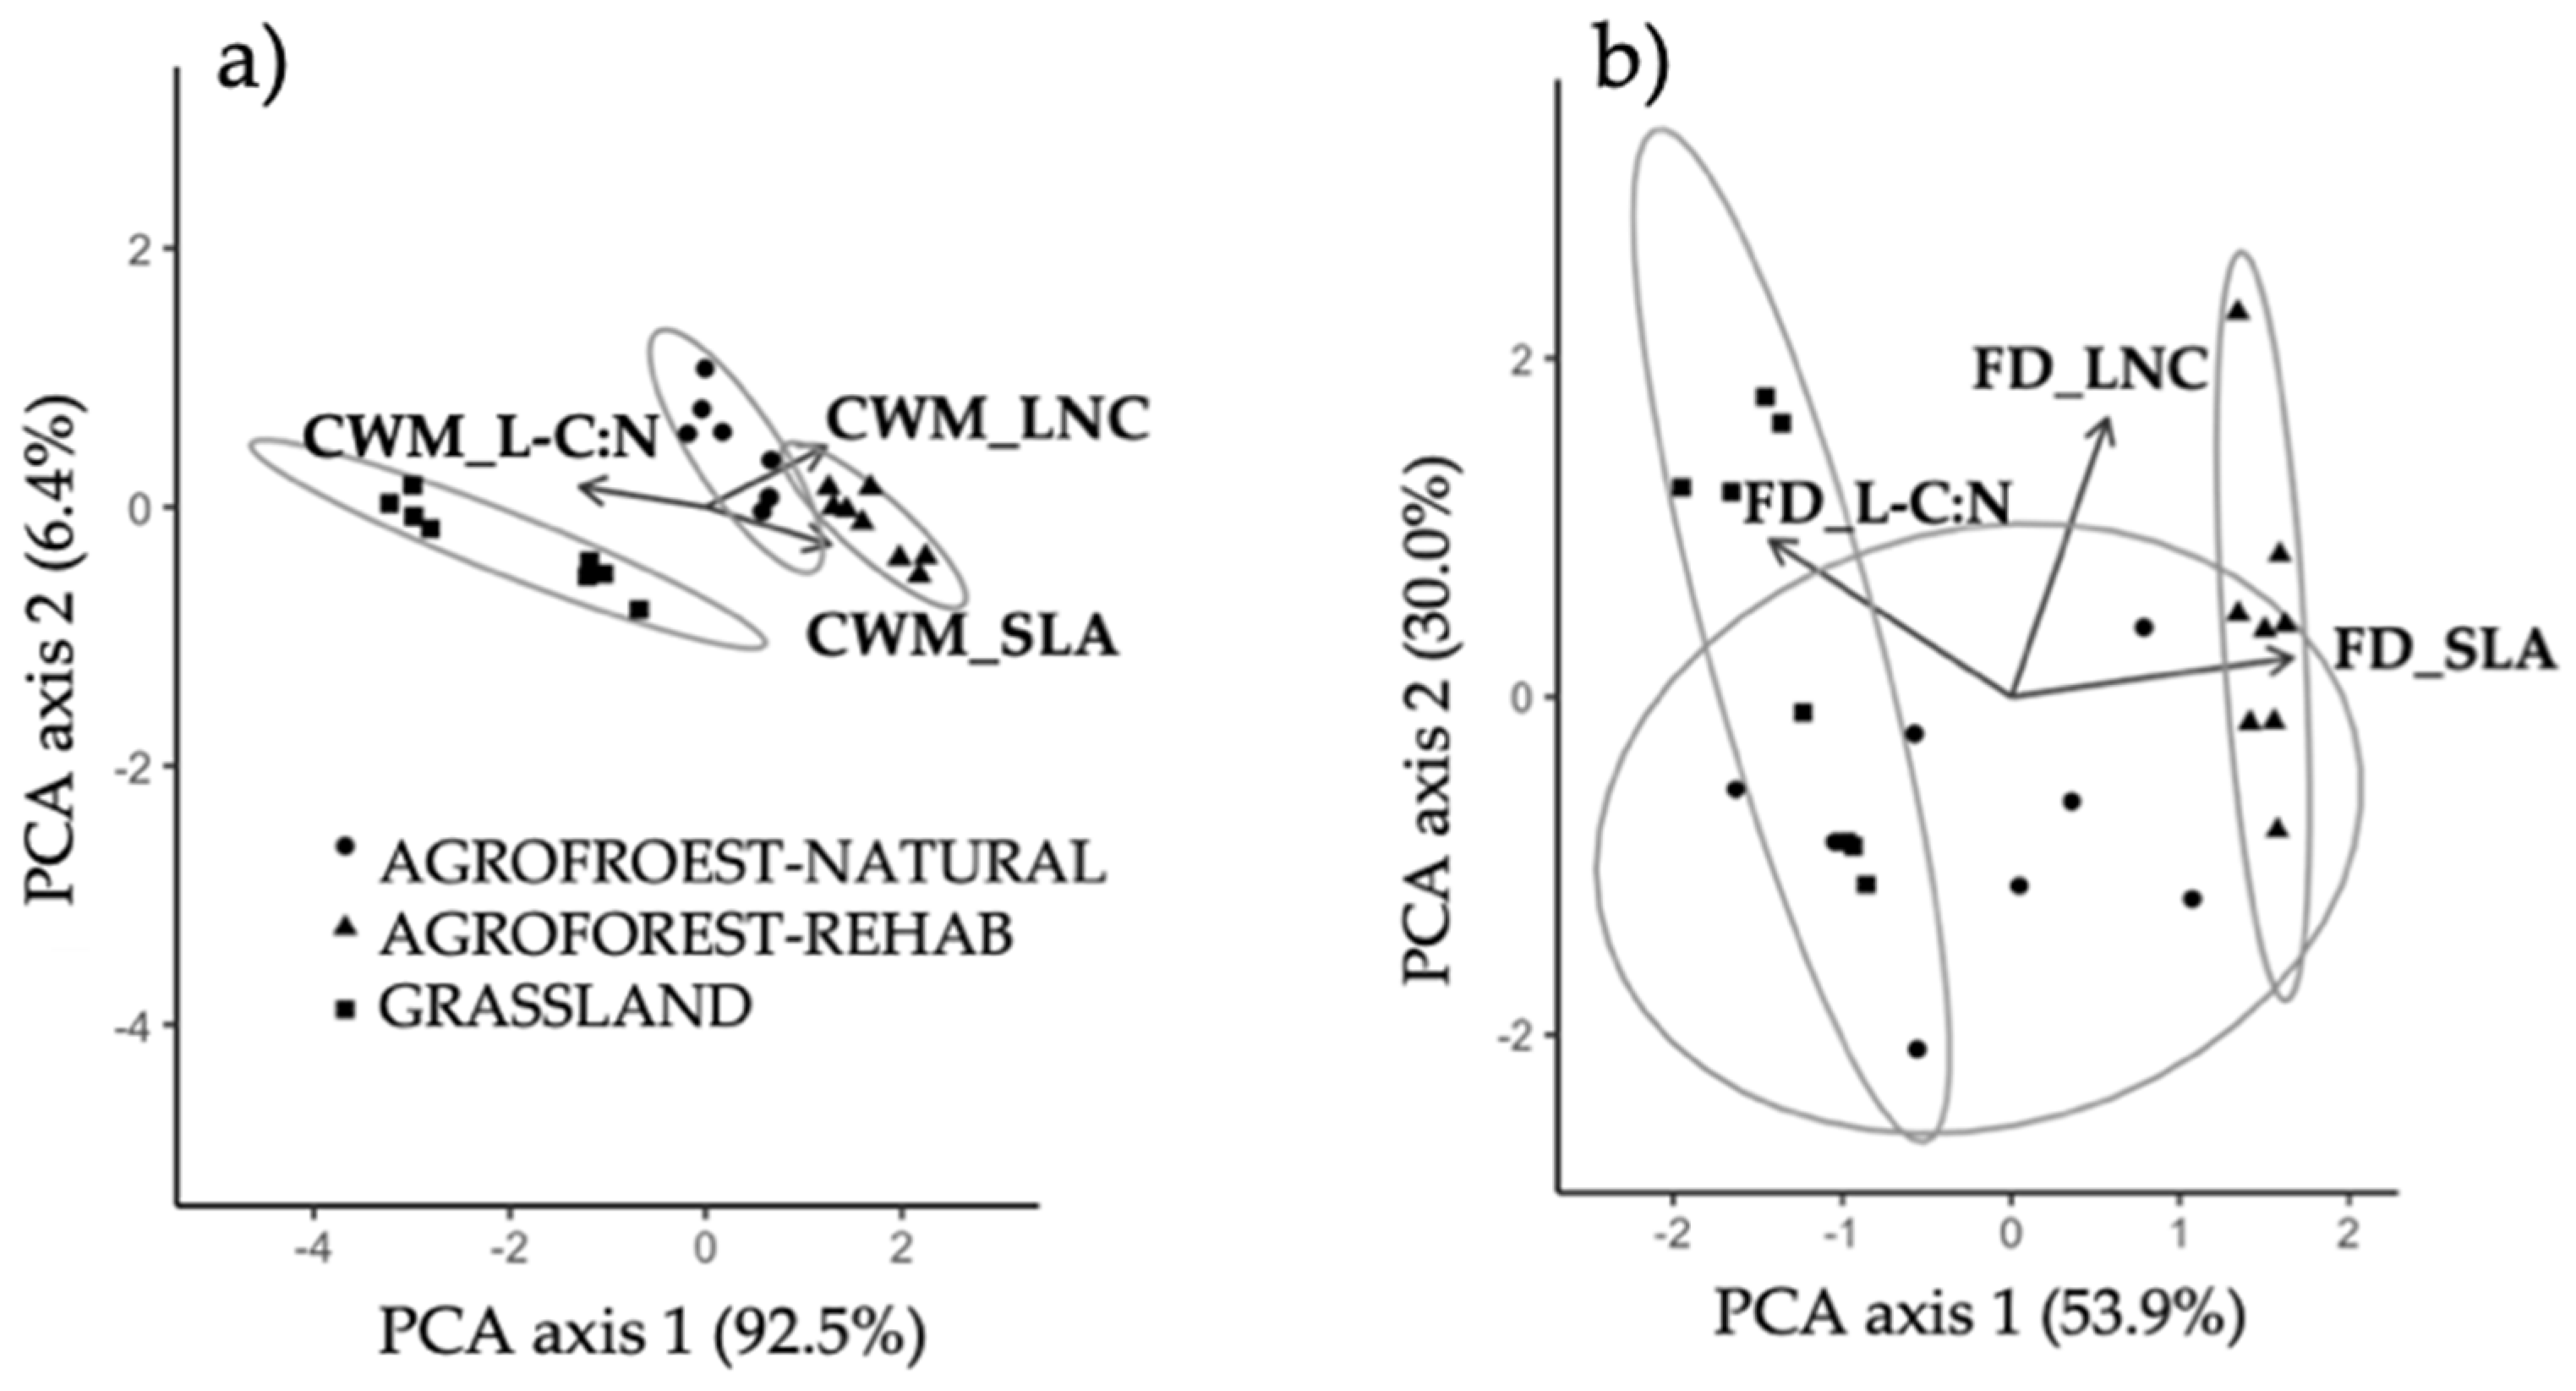 Sustainability Free Full Text Plant Diversity And Agroecosystem Function In Riparian Agroforests Providing Ecosystem Services And Land Use Transition Html